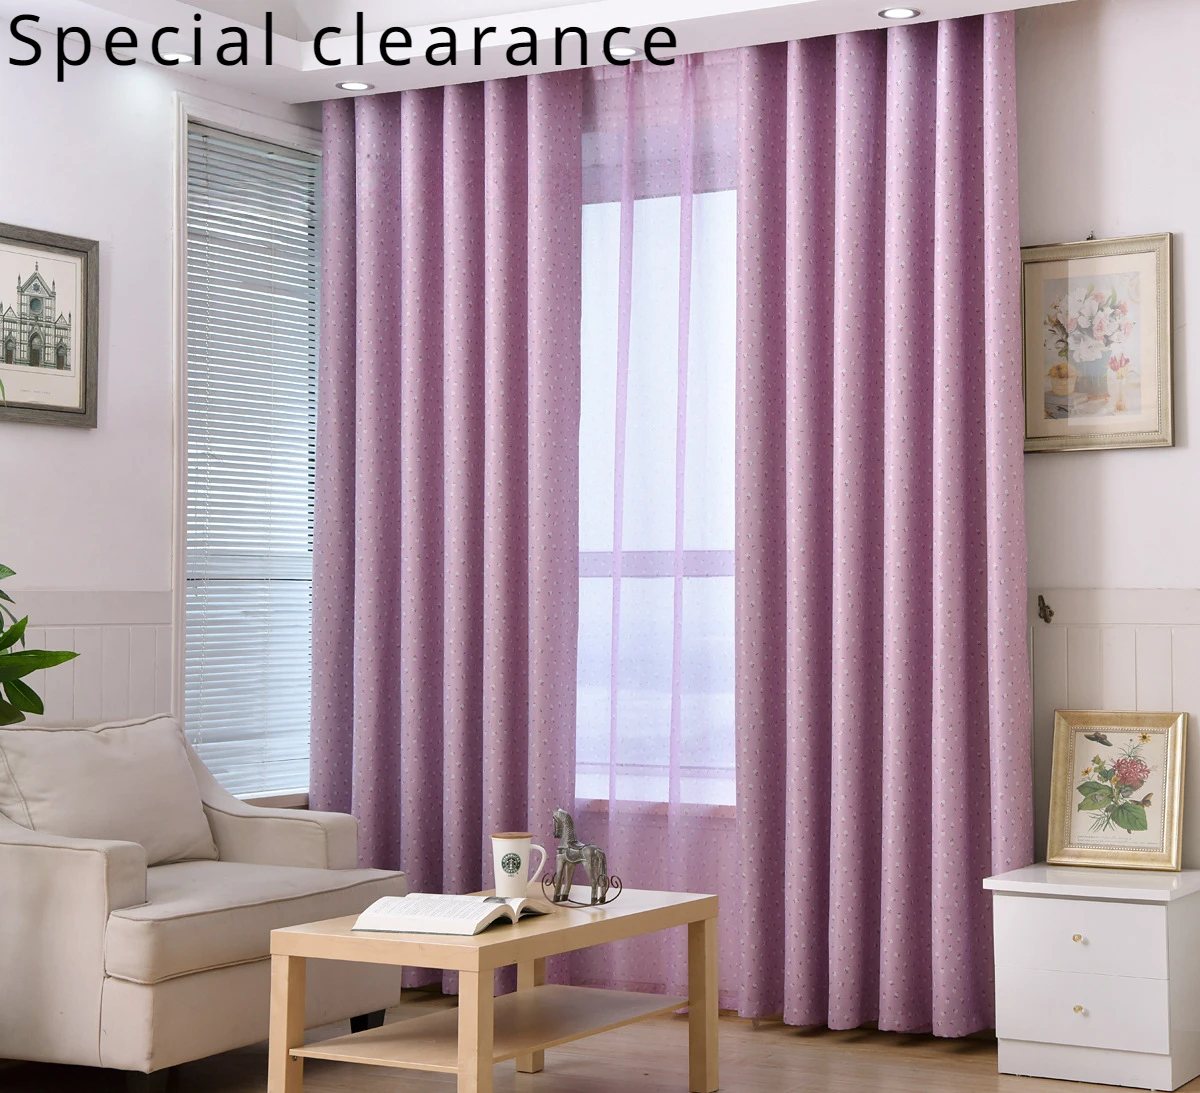 

New Special Clearance Deal with Full Blackout Curtain Fabric for Simple Room Curtains for Living Dining Room Bedroom